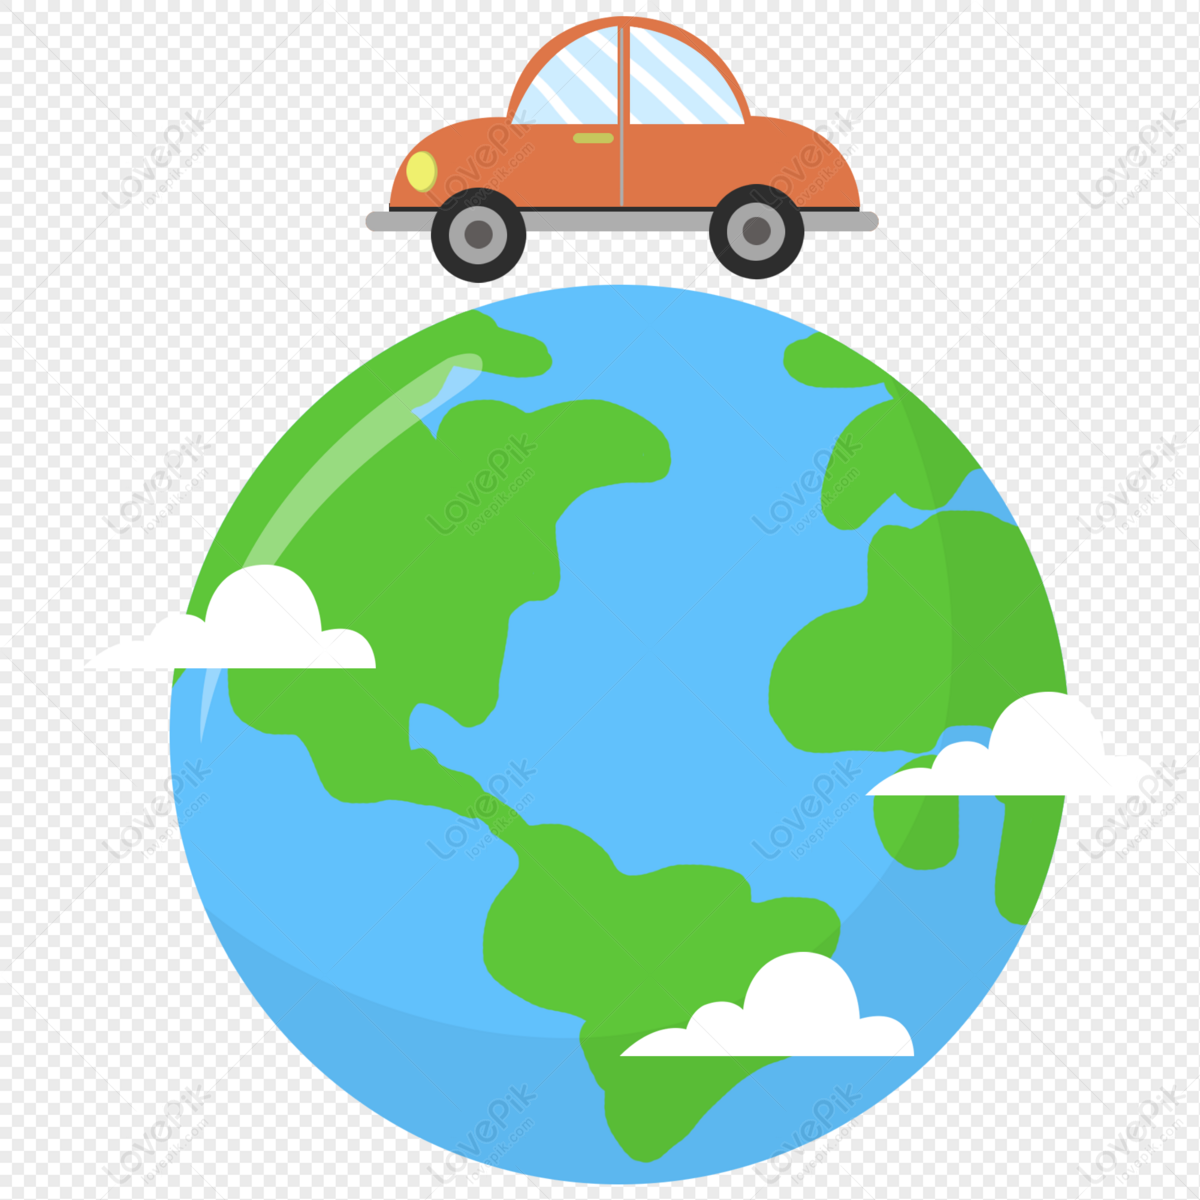 Hand Drawn Flat Style Globe And Car PNG Picture And Clipart Image For ...